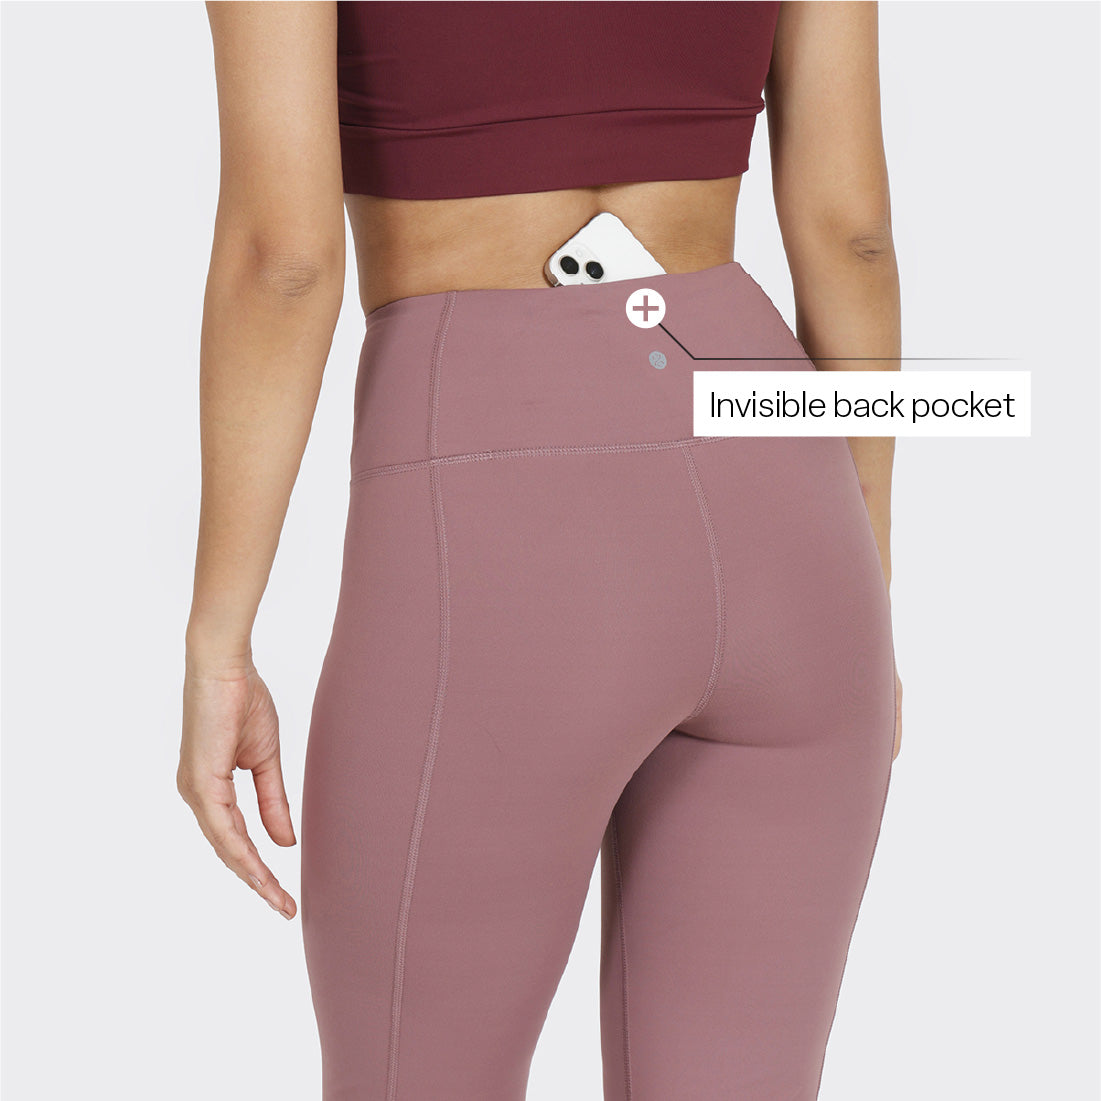 Yoga Flare Pants with Polyester Fabric and Hidden Back Pocket